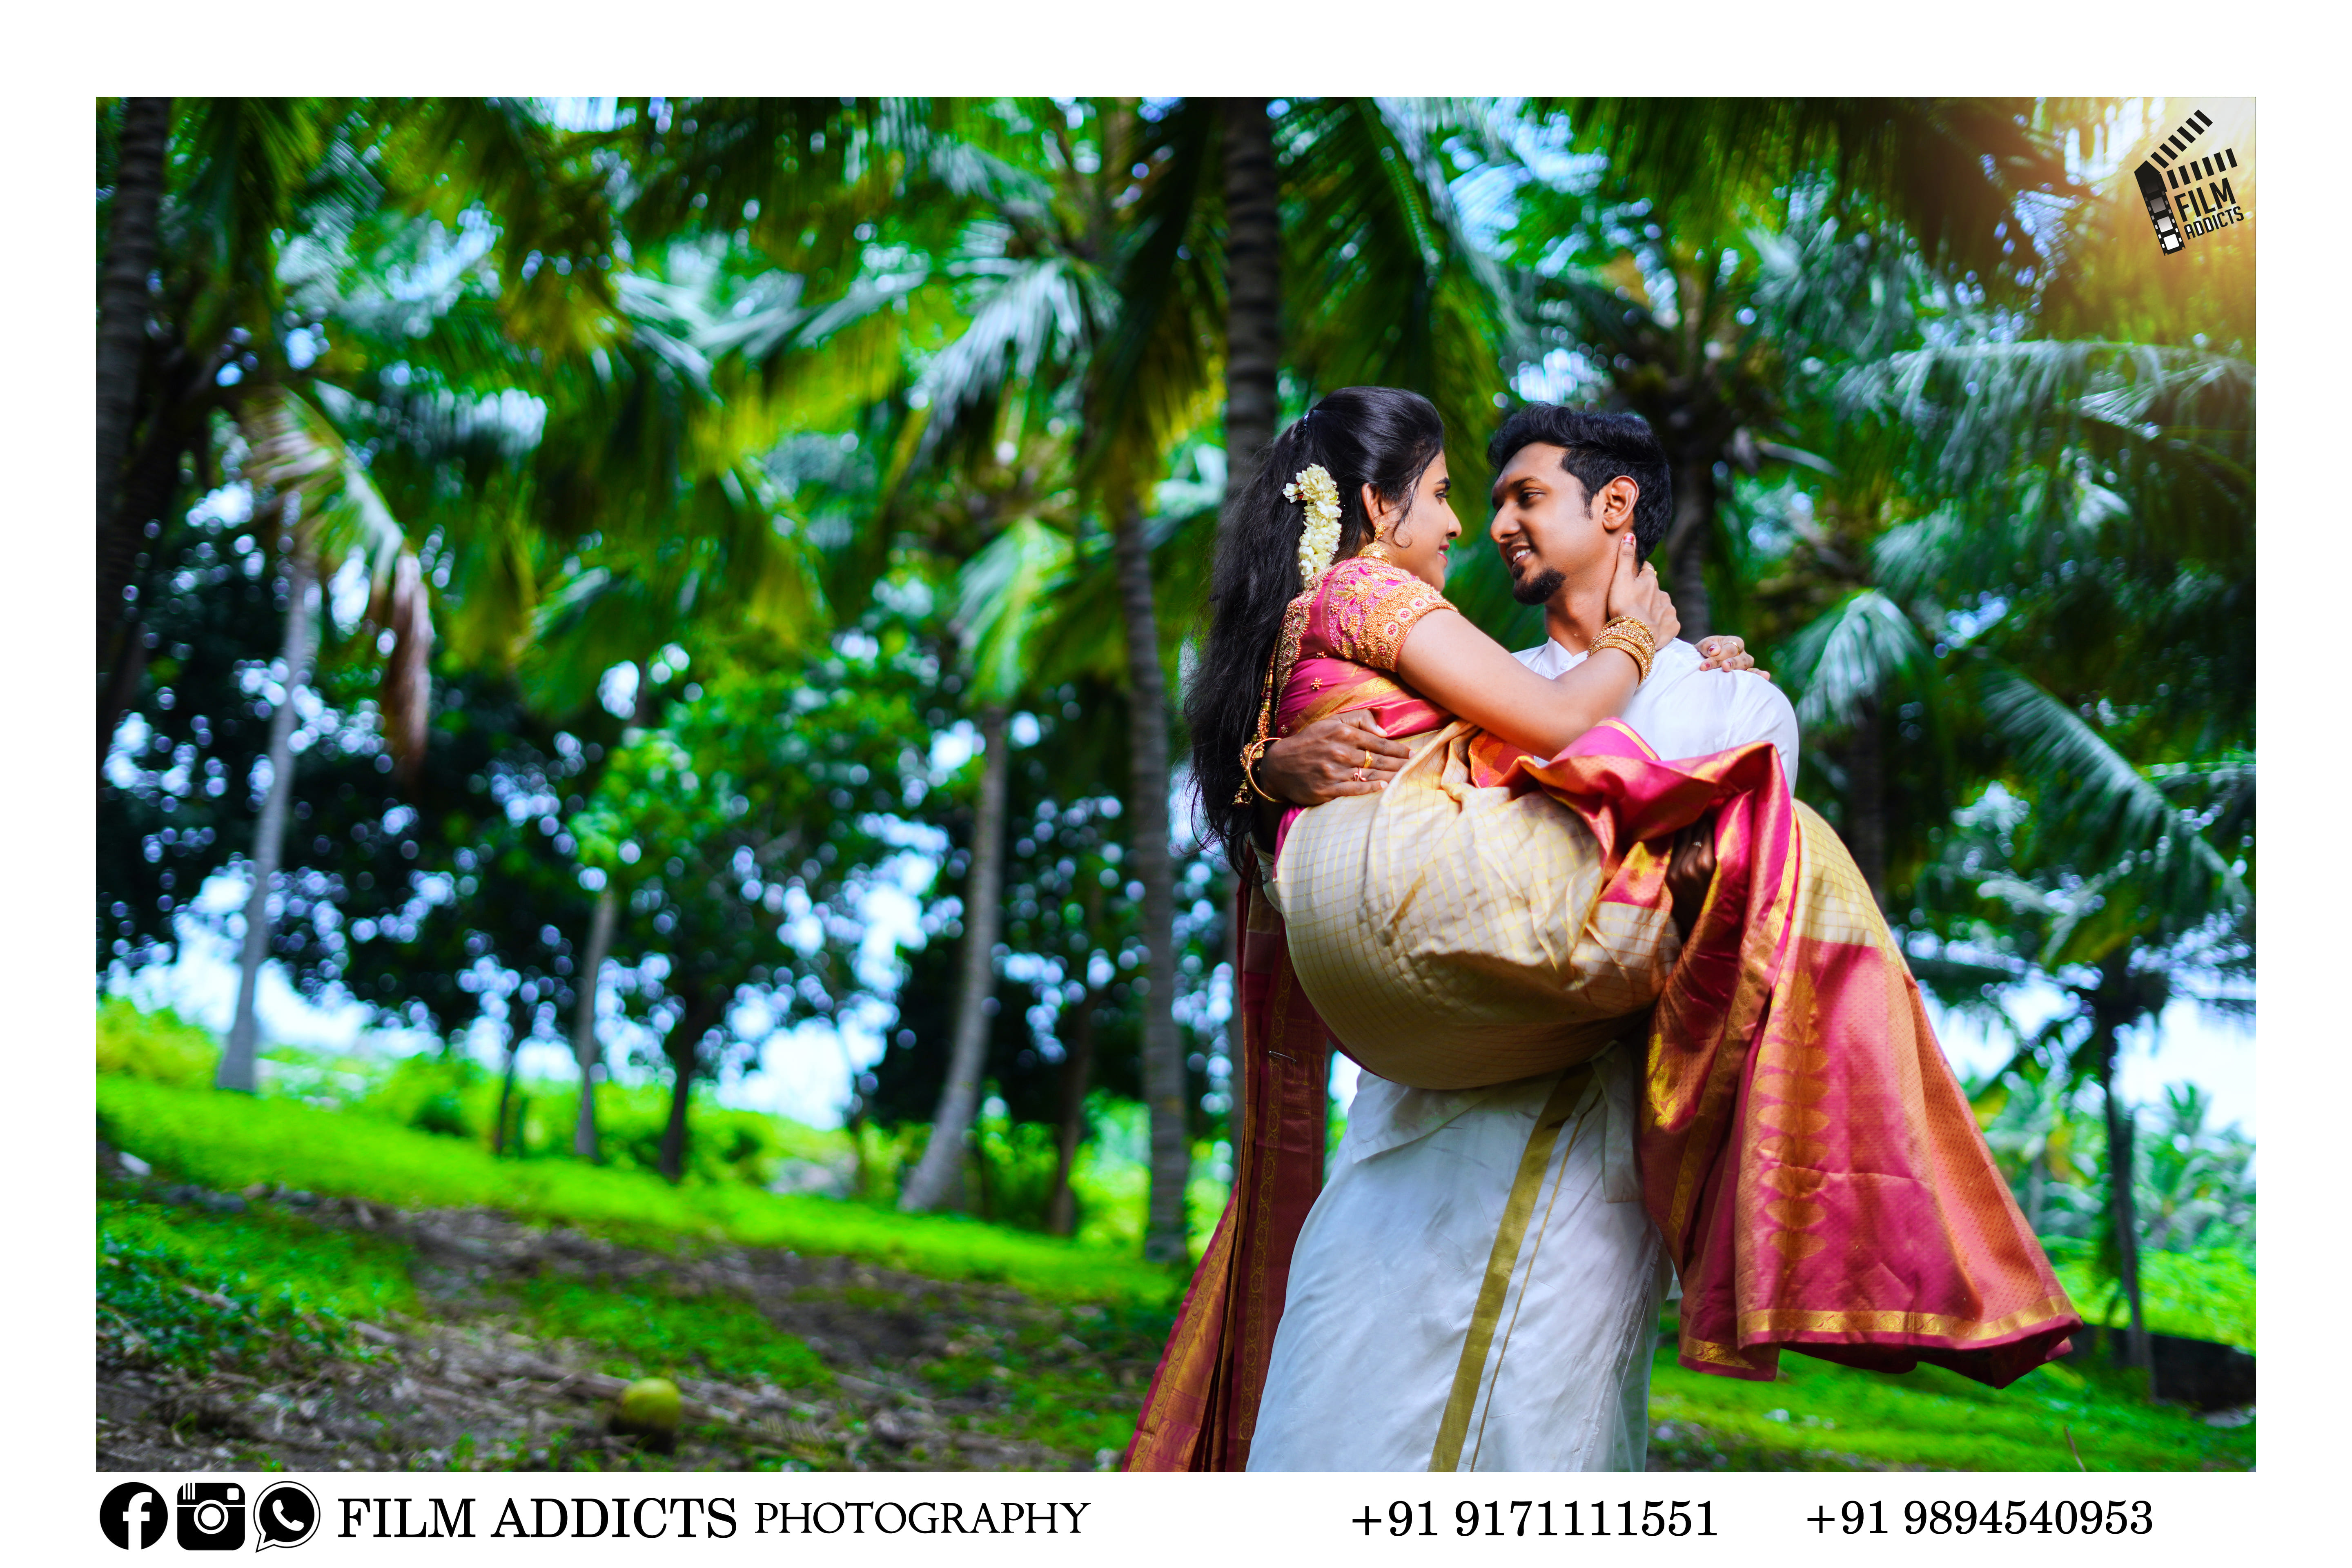 best-candid-wedding-photography-in-theni, candid-wedding-photographer-in-theni, asian-wedding-photography-in-theni, best-candid-photographers-in-theni, best-photographers-in-theni, best-photography-theni,candid-photographers-theni, candid-photography-in-theni,